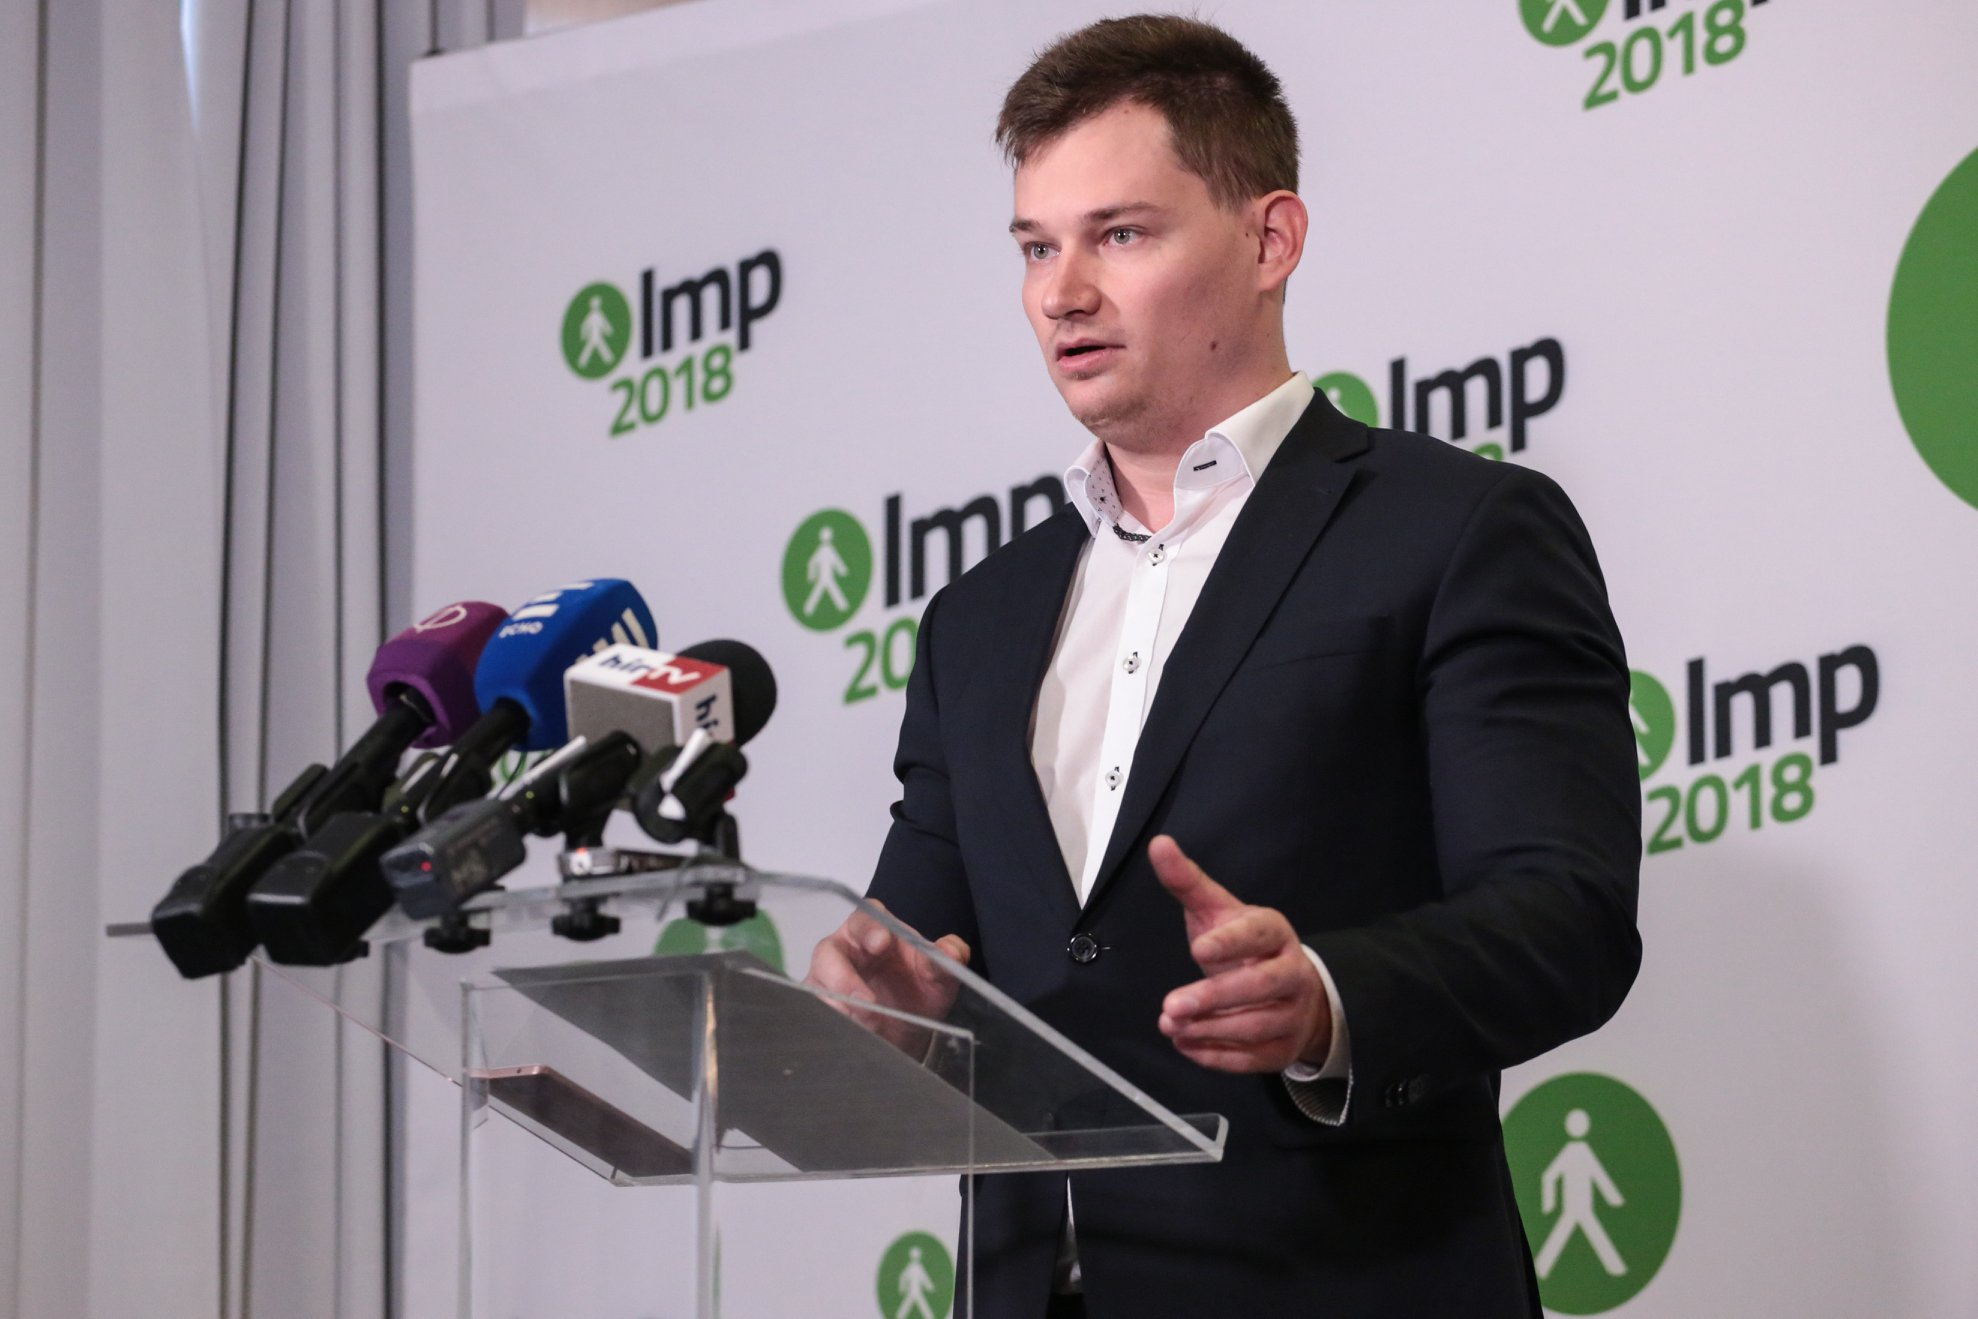 LMP Assurance for Representation of Green Issues, Party Co-leader Says